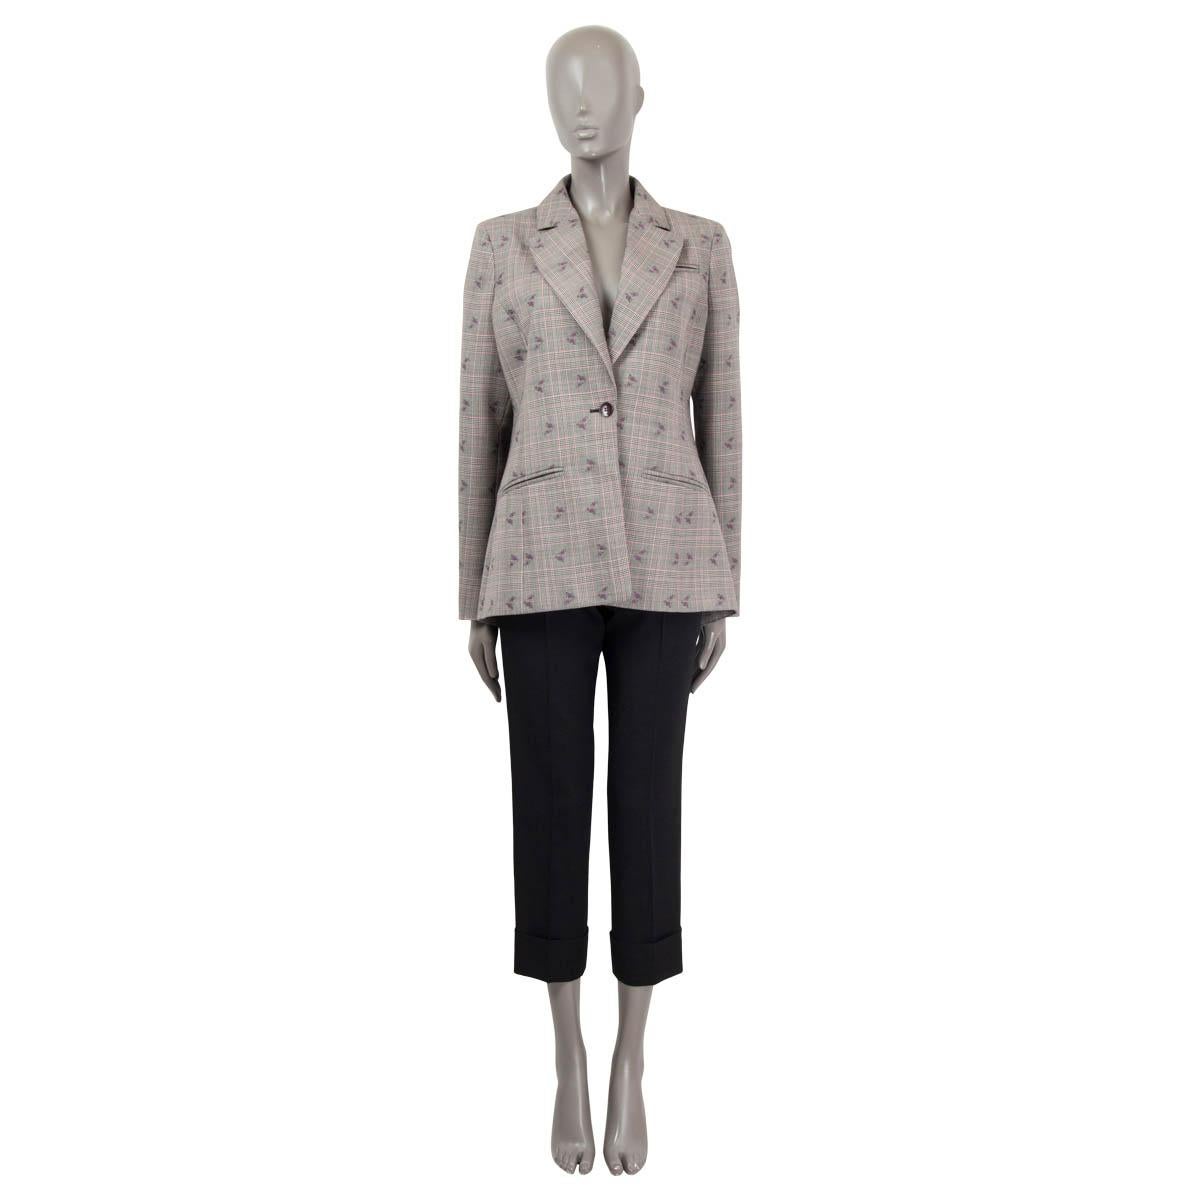 100% authentic Altuzarra floral-embroidered prince of wales blazer in gray, black, and purple wool (90%), cotton (9%) and elastane (1%). Opens with one button. Features a two front slit pockets, one chest pocket and a box pleat at the back. Lined in